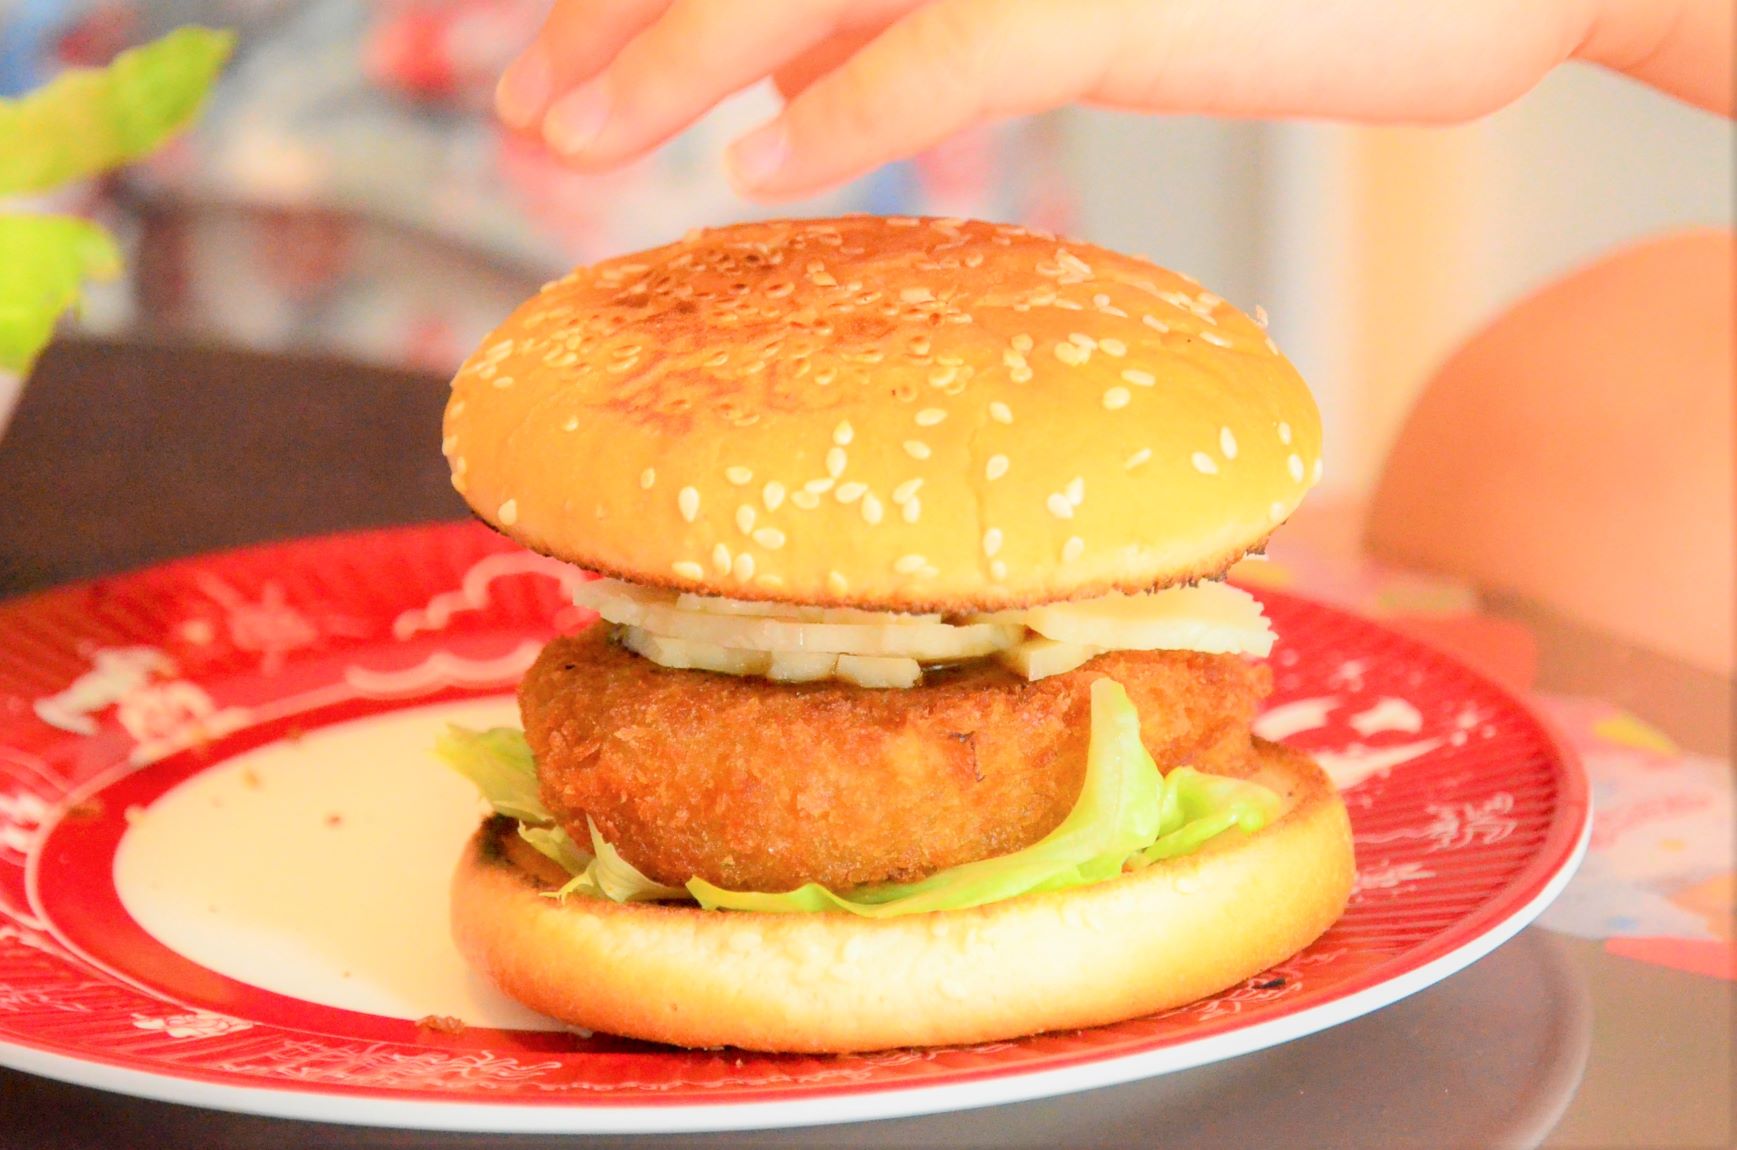 Completion of handmade croquette burger